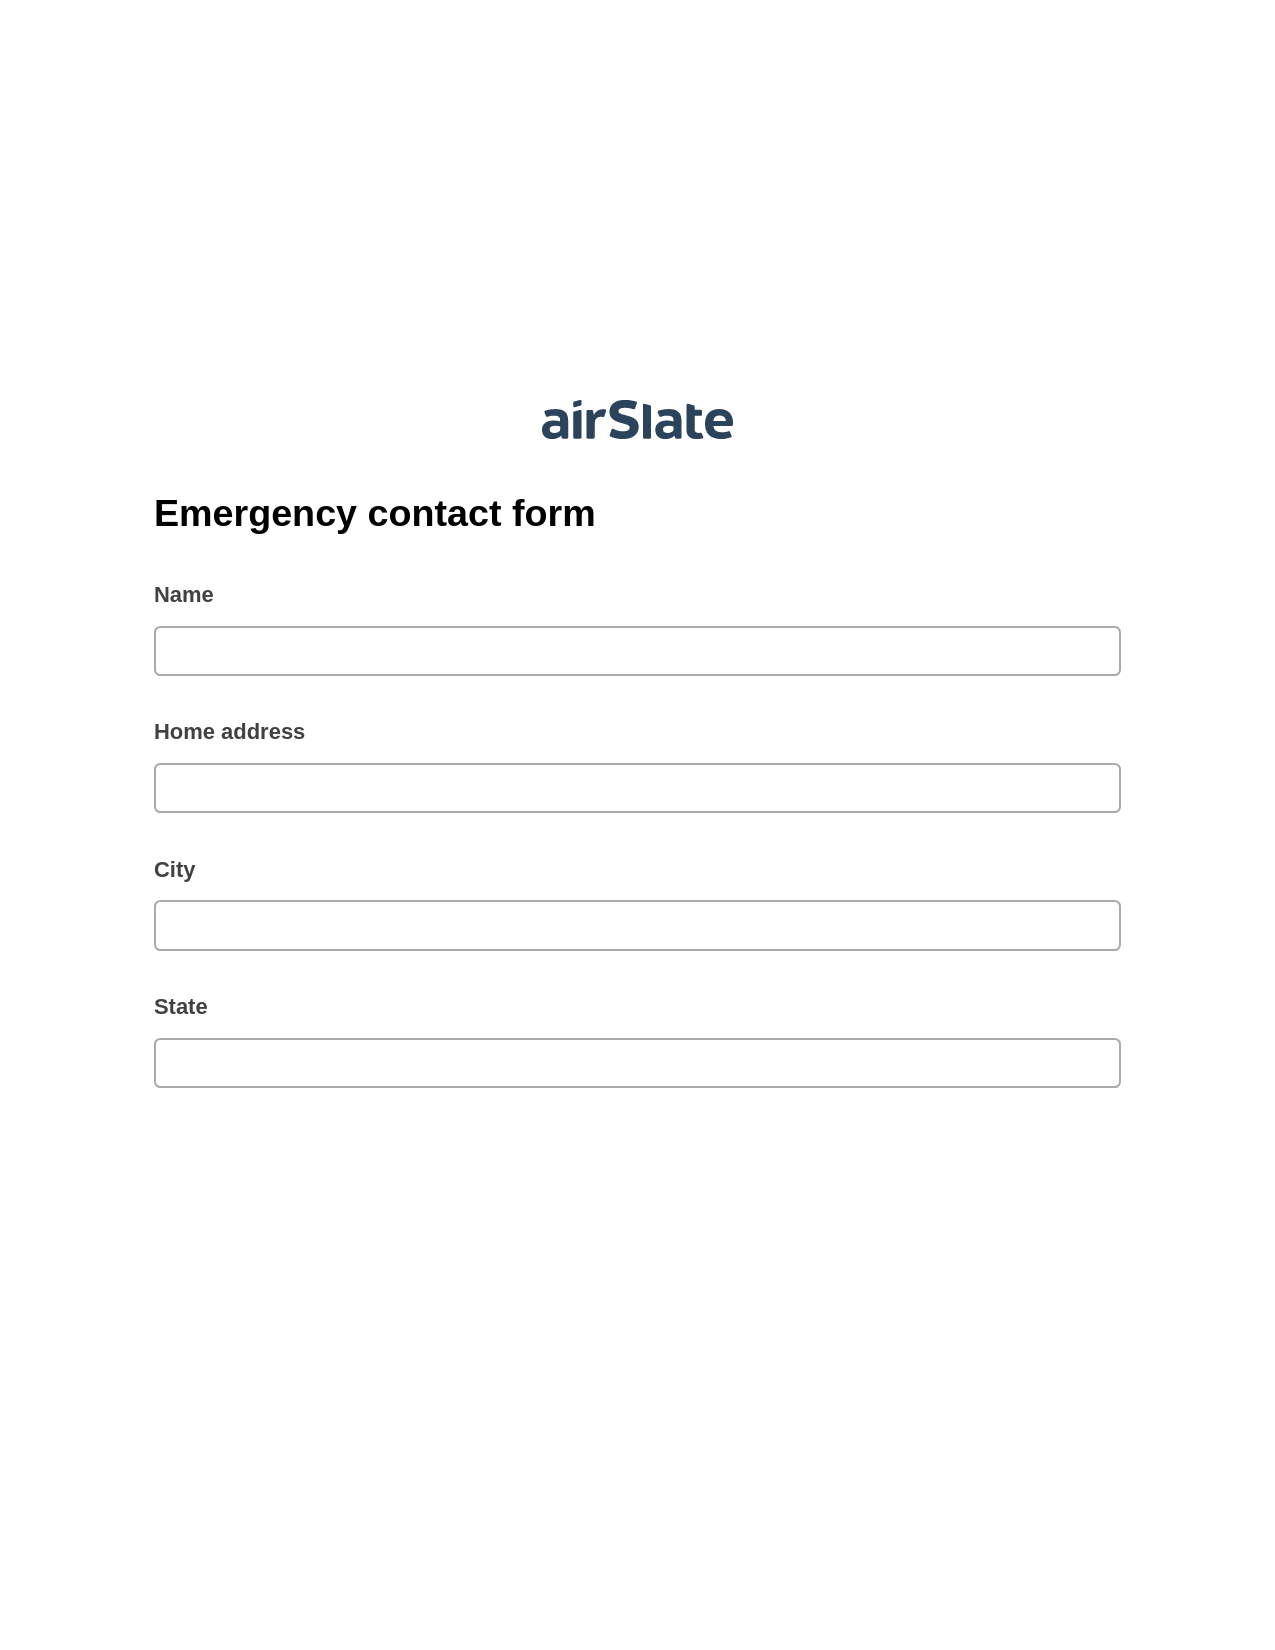 Emergency contact form Pre-fill from Google Sheet Dropdown Options Bot, Update Salesforce Record Bot, Post-finish Document Bot